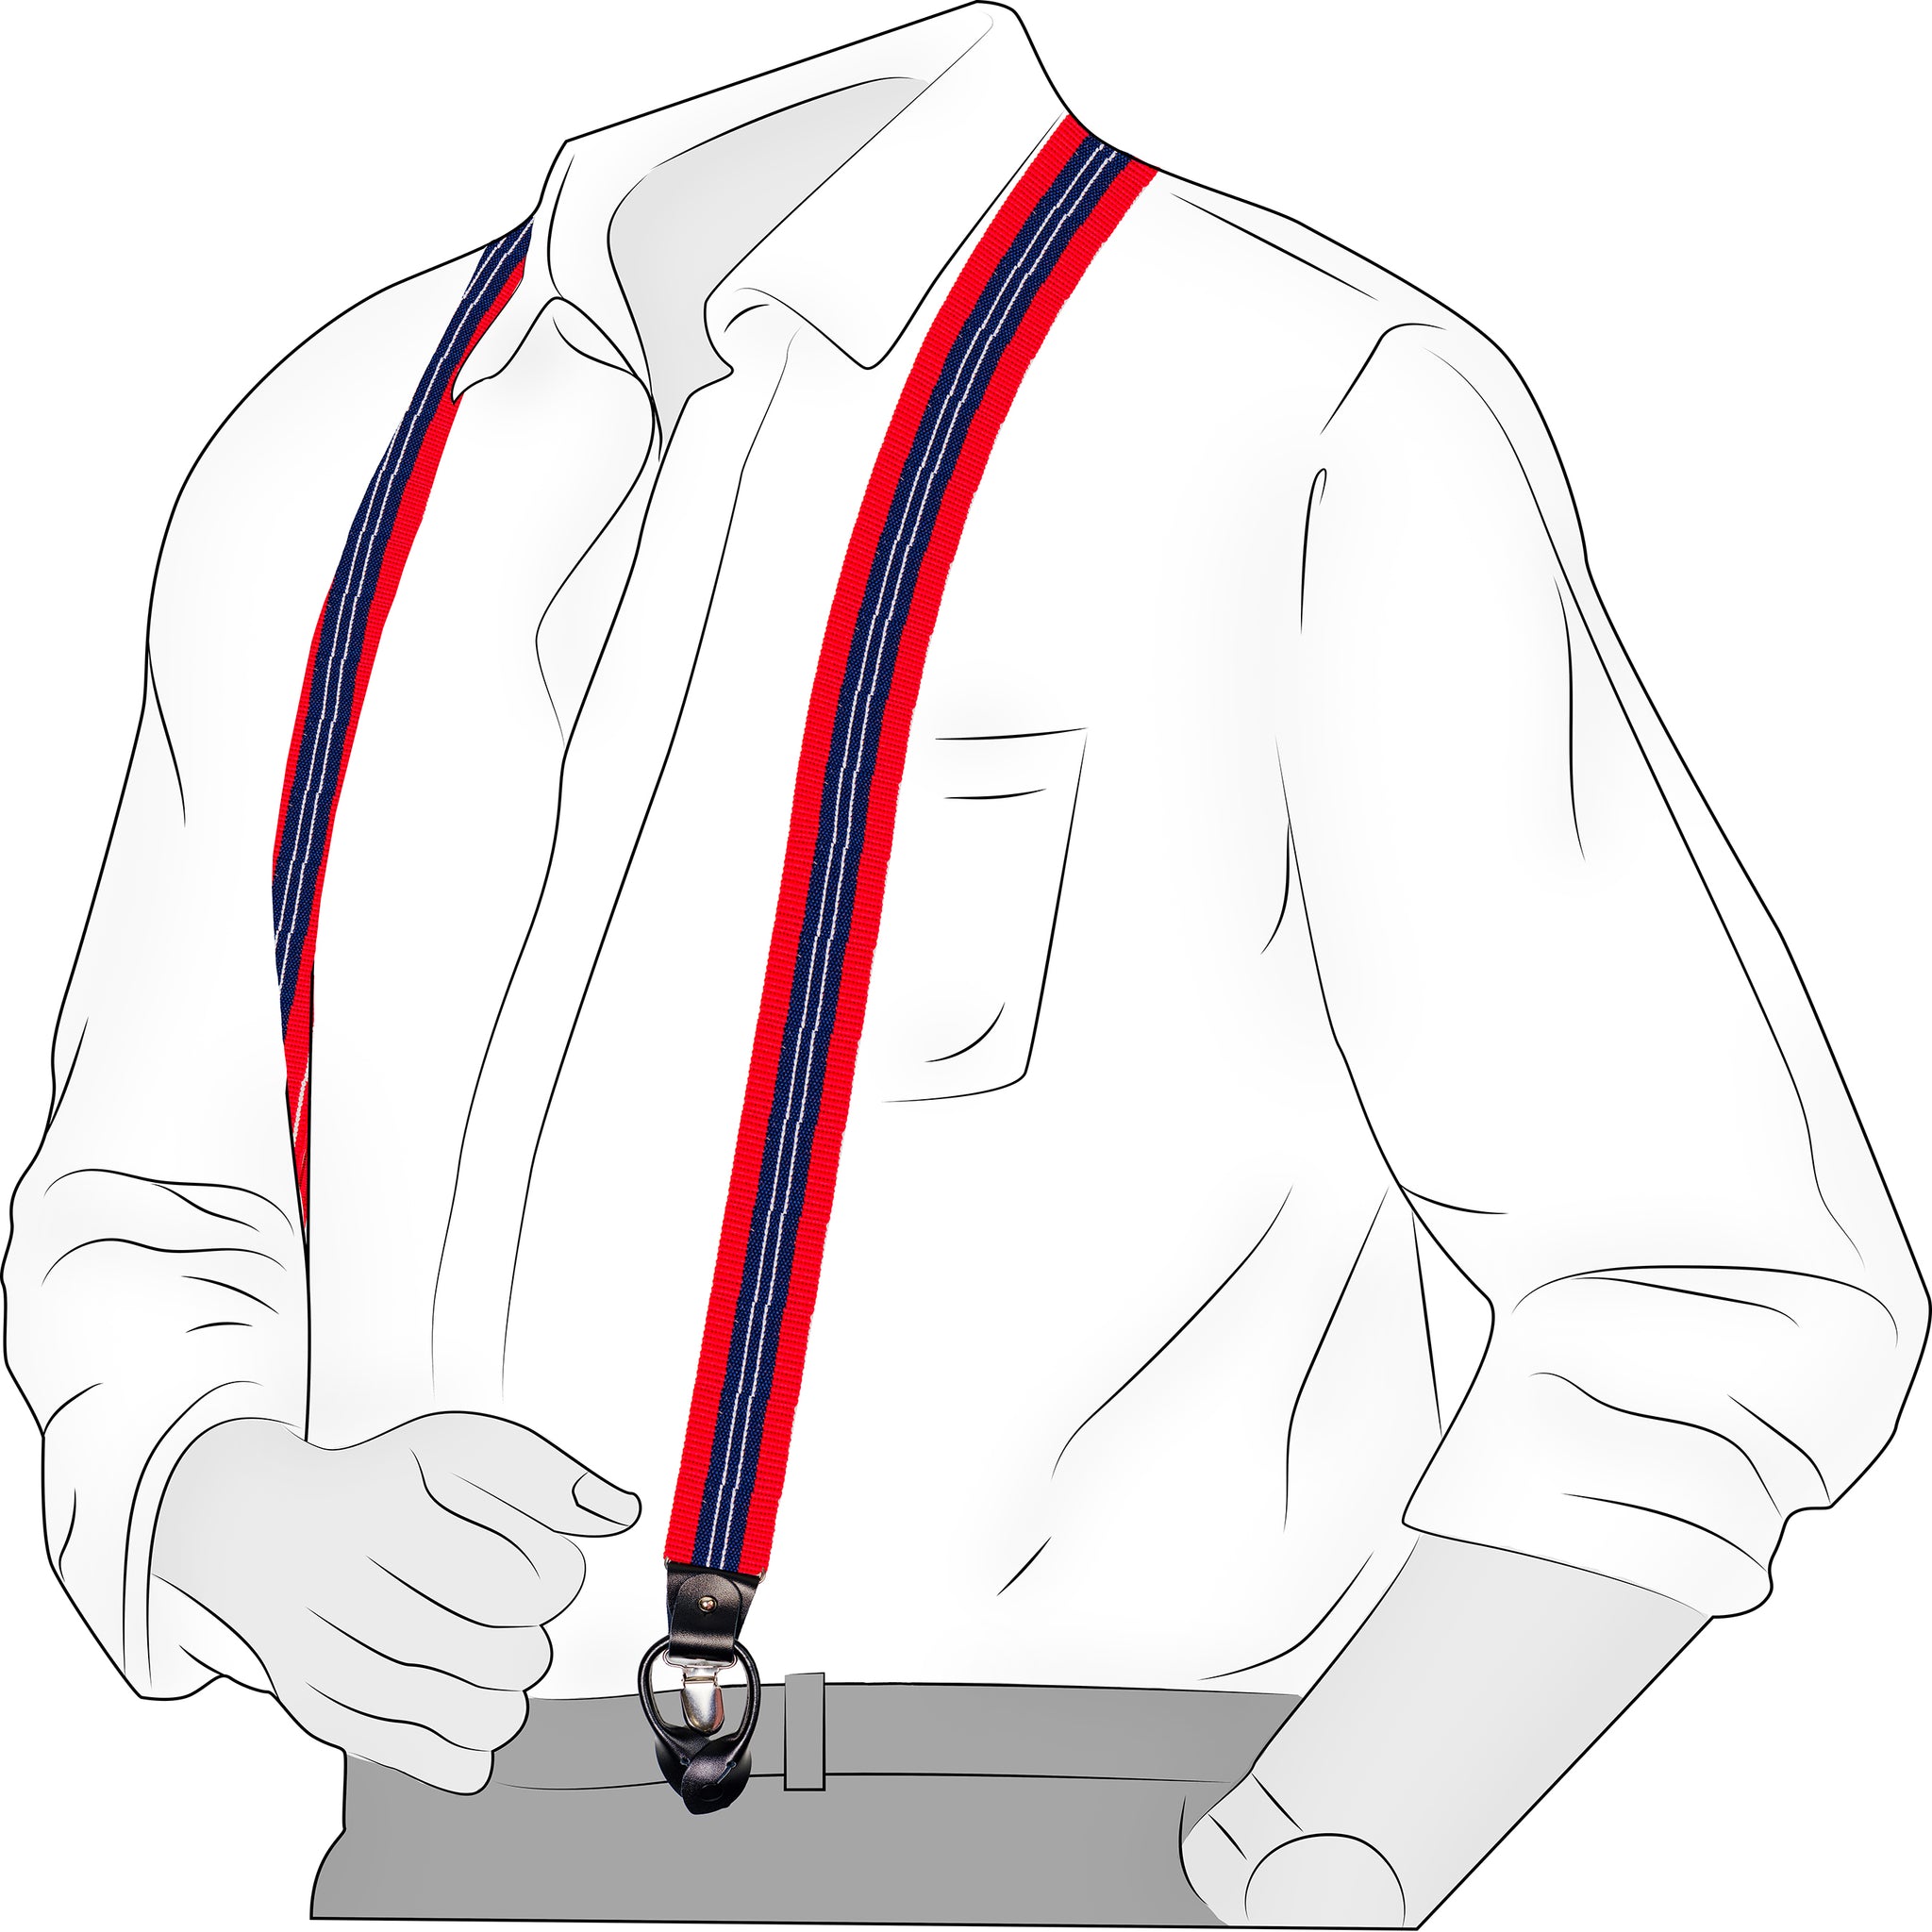 Chokore Stretchy Y-shaped Suspenders with 6-clips (Red & Navy Blue)